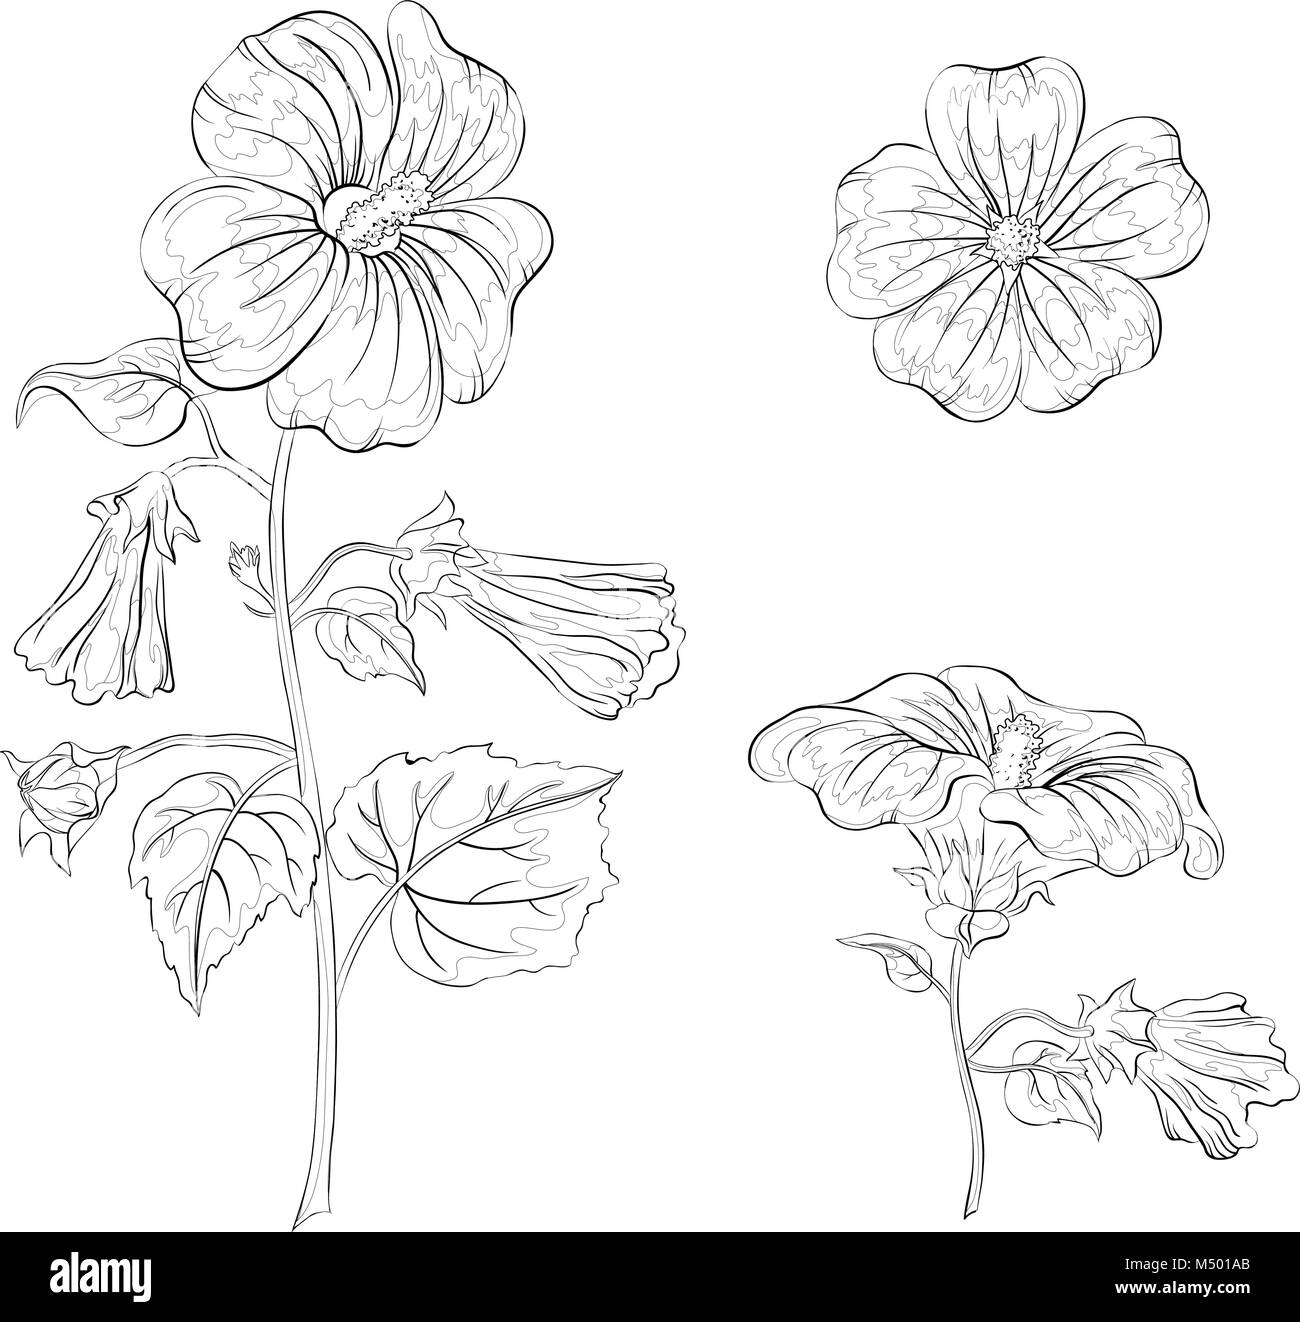 Flowers mallow, contours Stock Vector